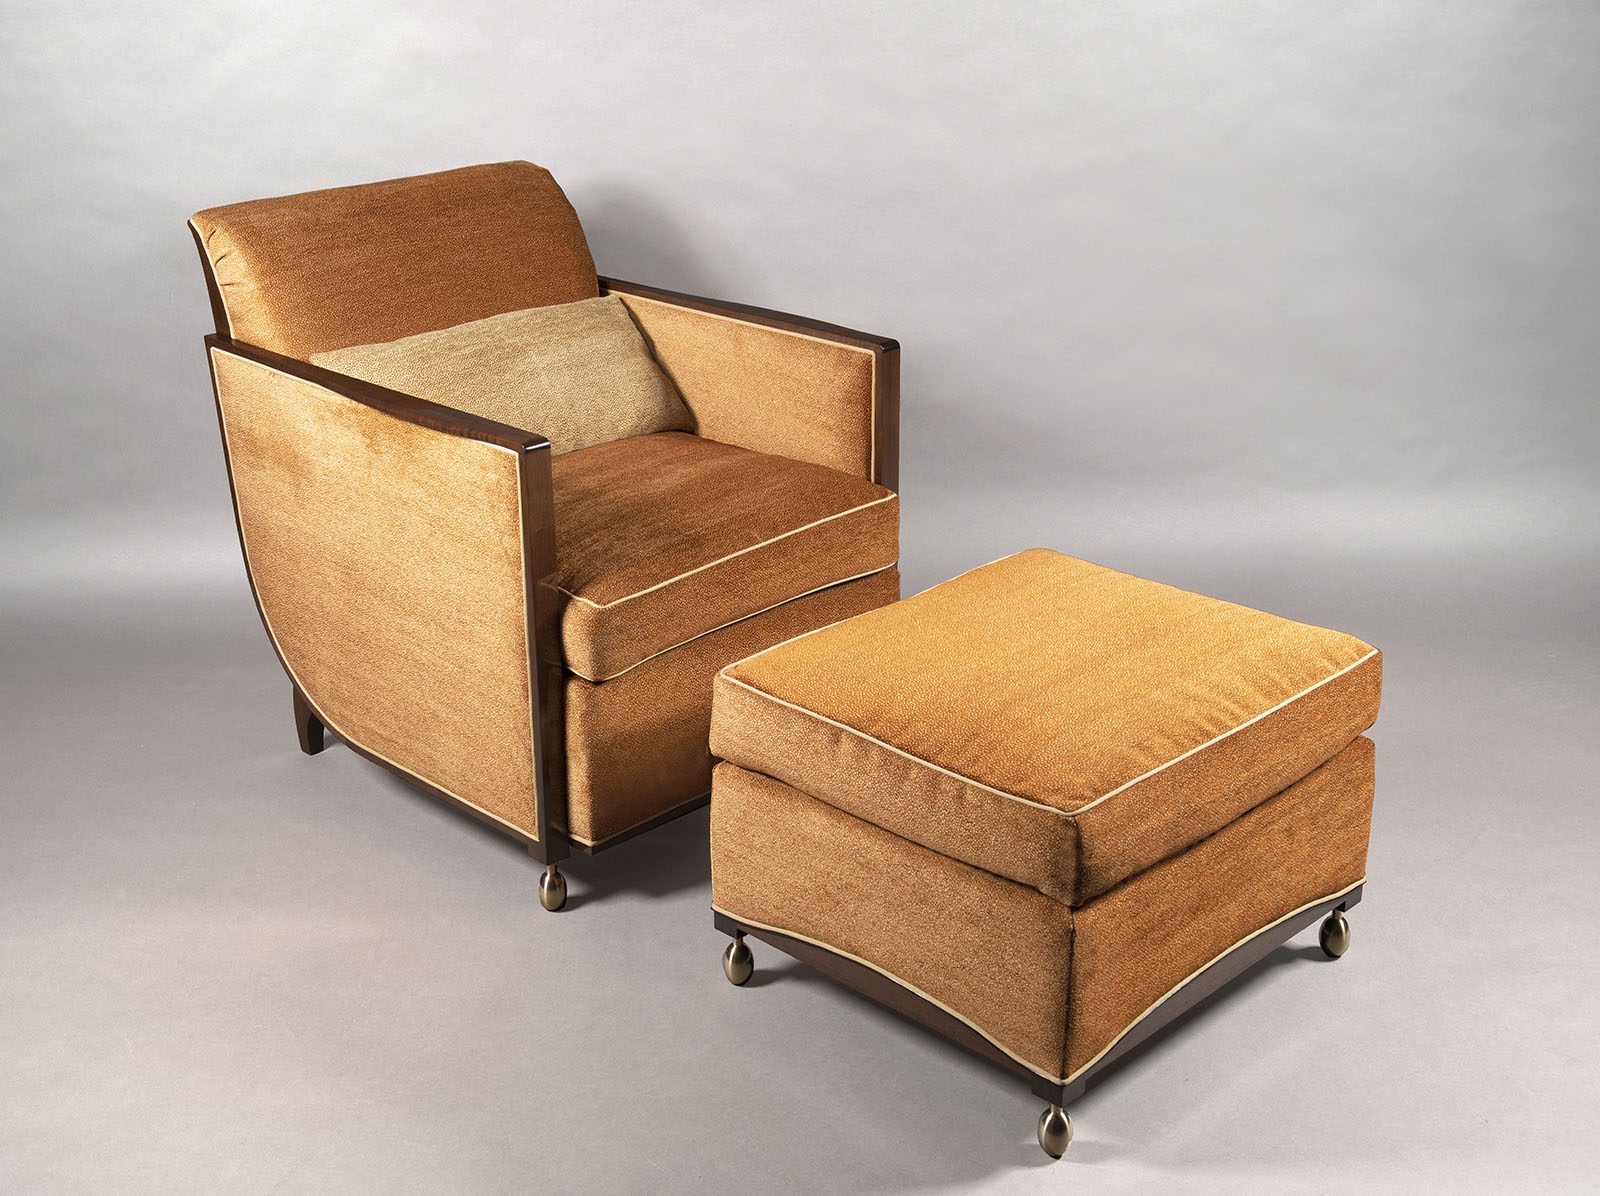 A French 30’s inspired Club Chair with matching Ottoman by ILIAD Design